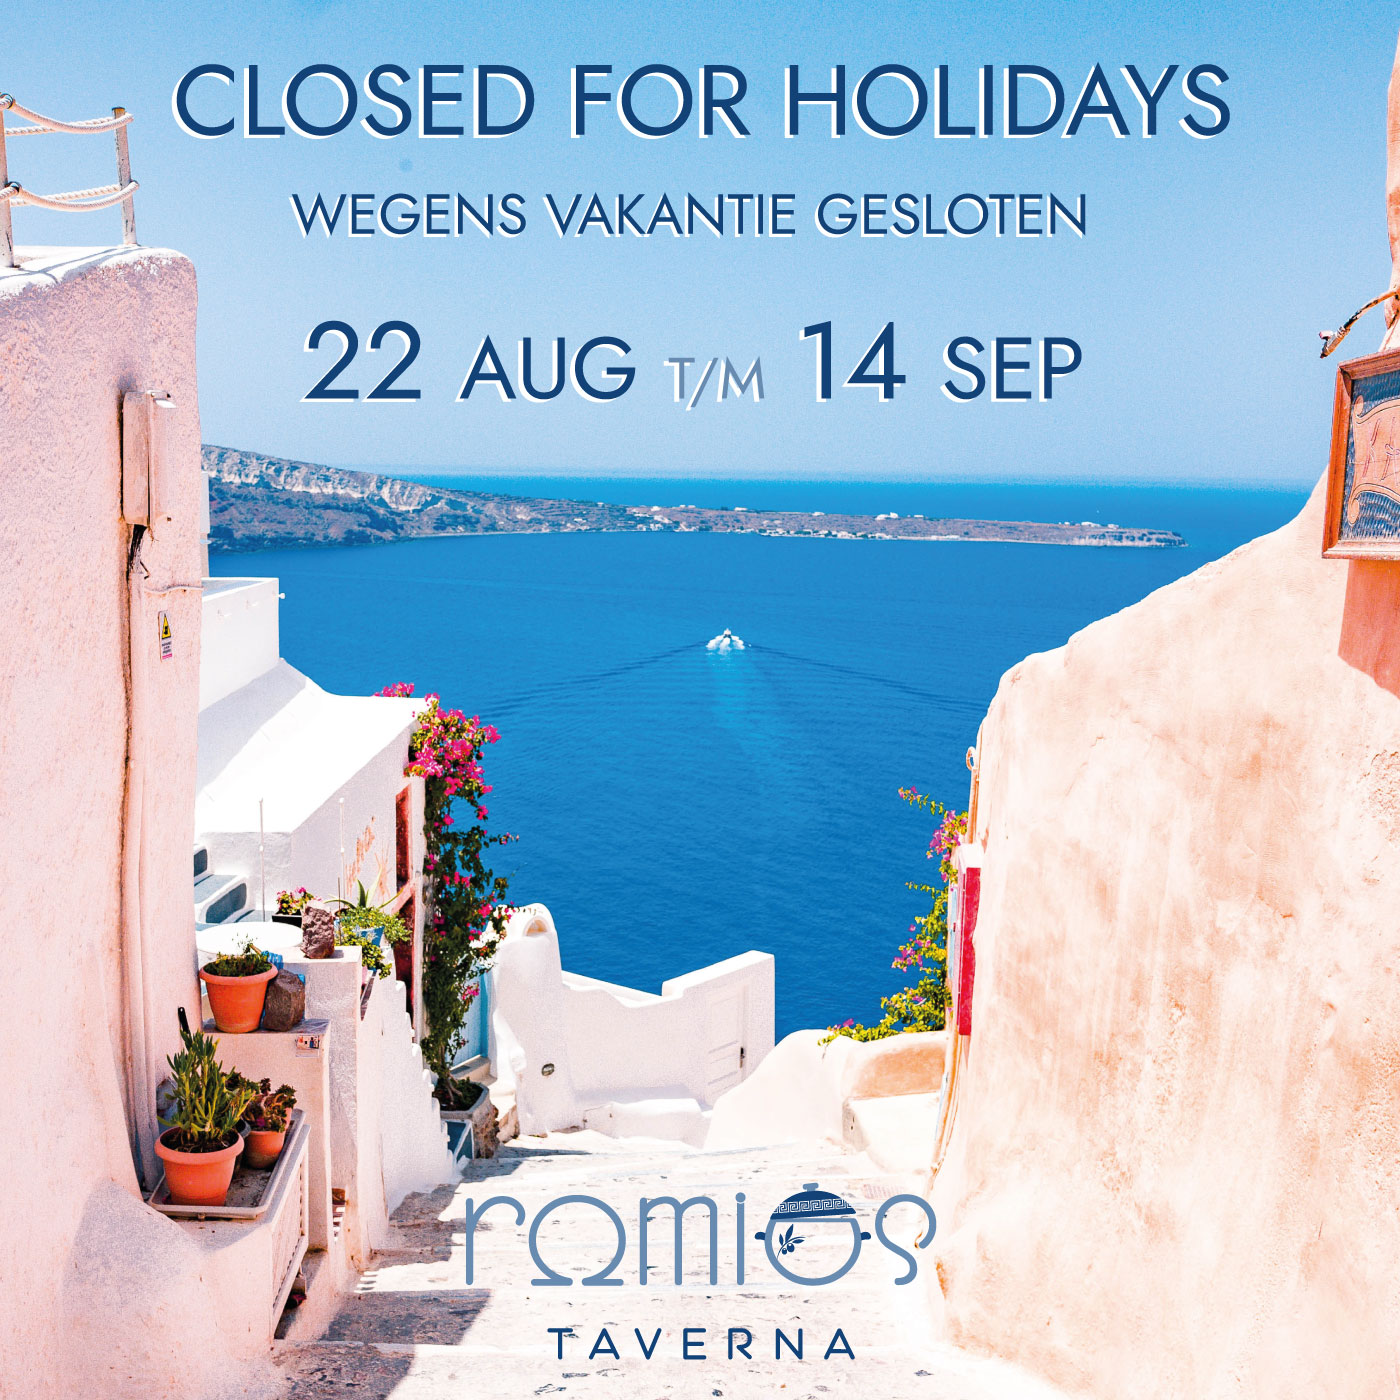 Closed for holidays